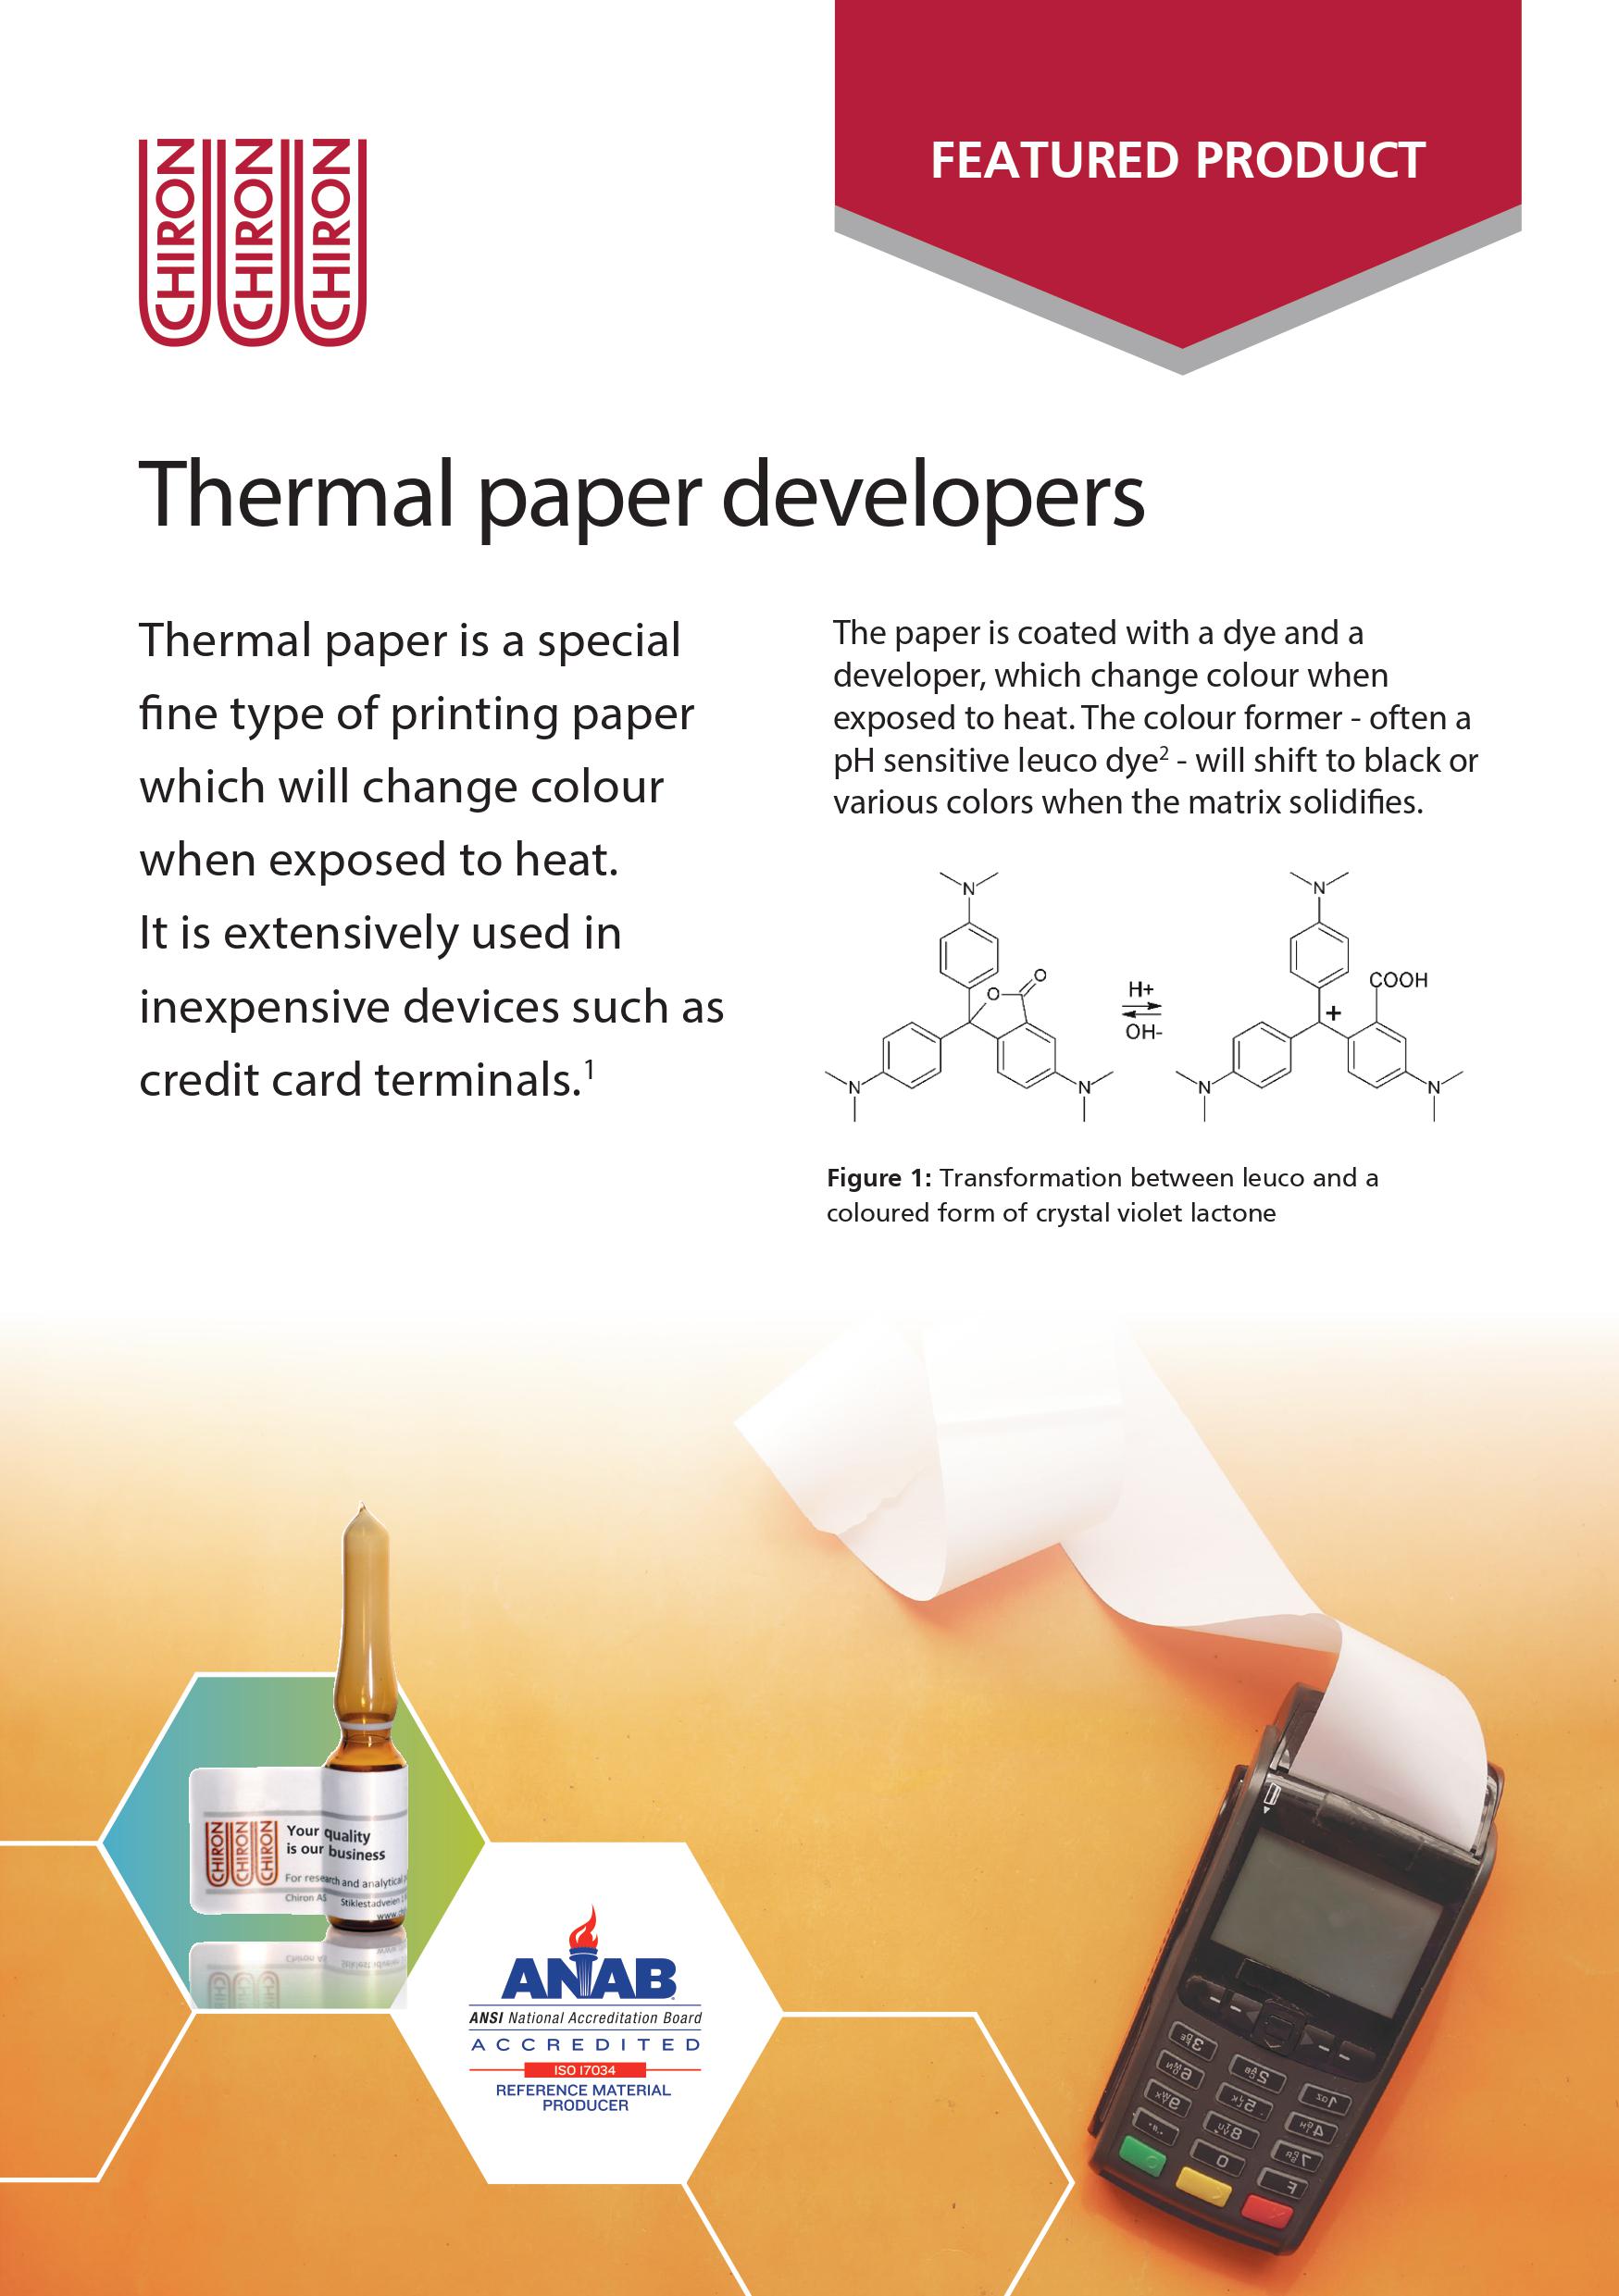 Featured product: Thermal paper developers